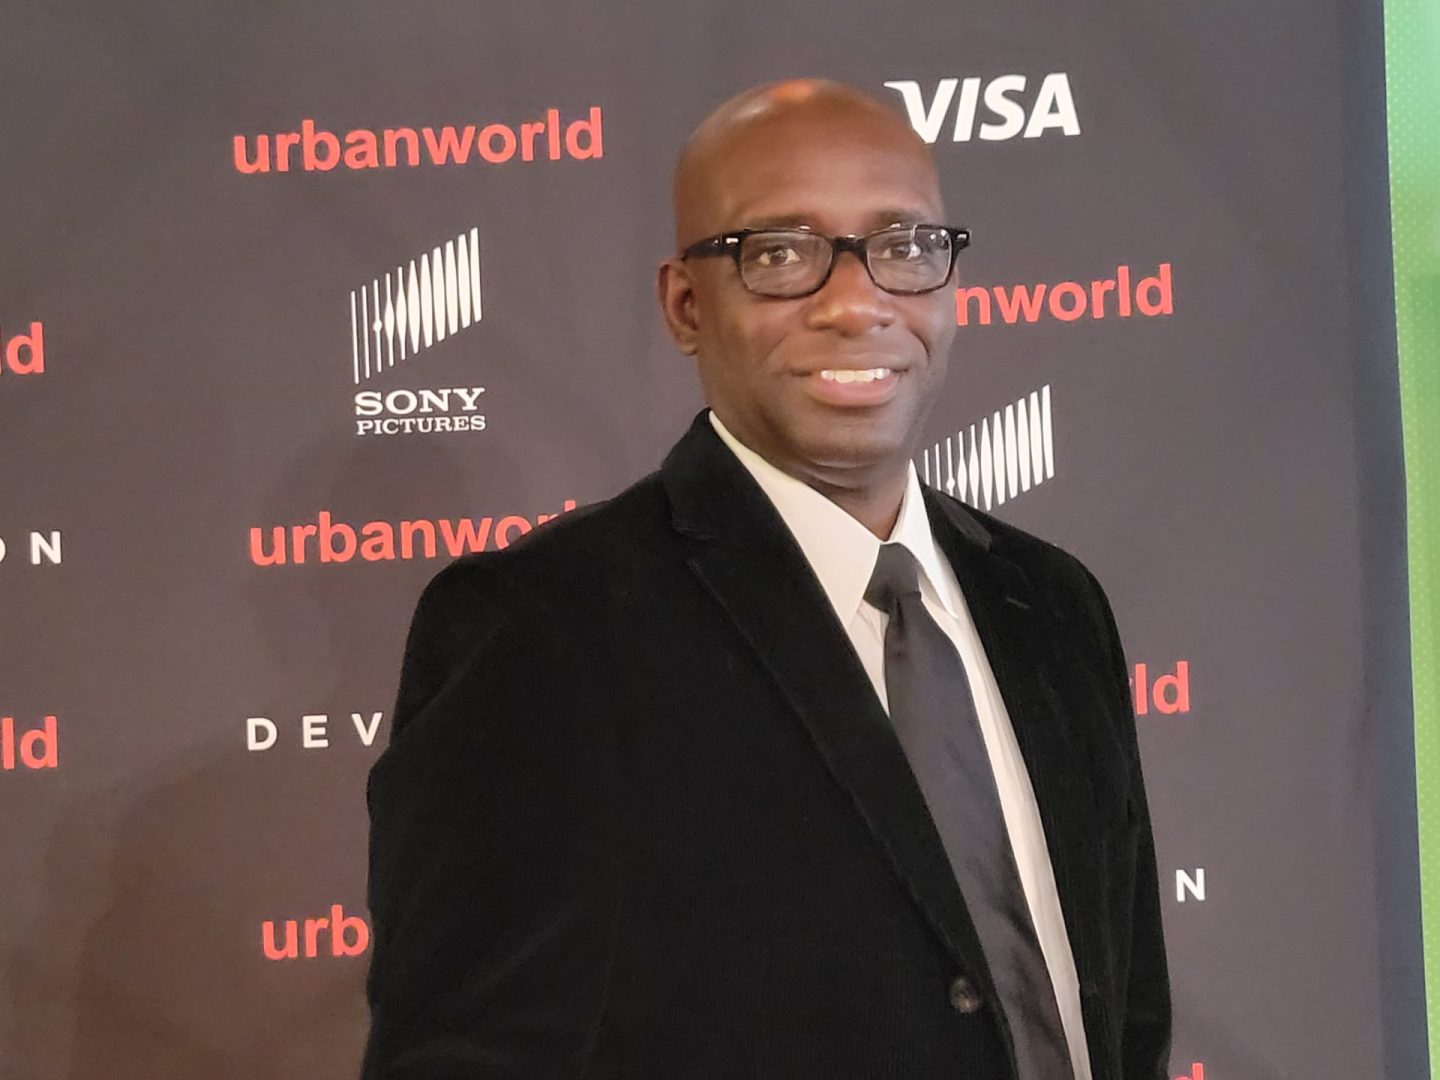 Urbanworld Film Festival Founder and Chairman Stacy Spikes at opening night in New York City. (Photo by Derrel Jazz Johnson for rolling out)